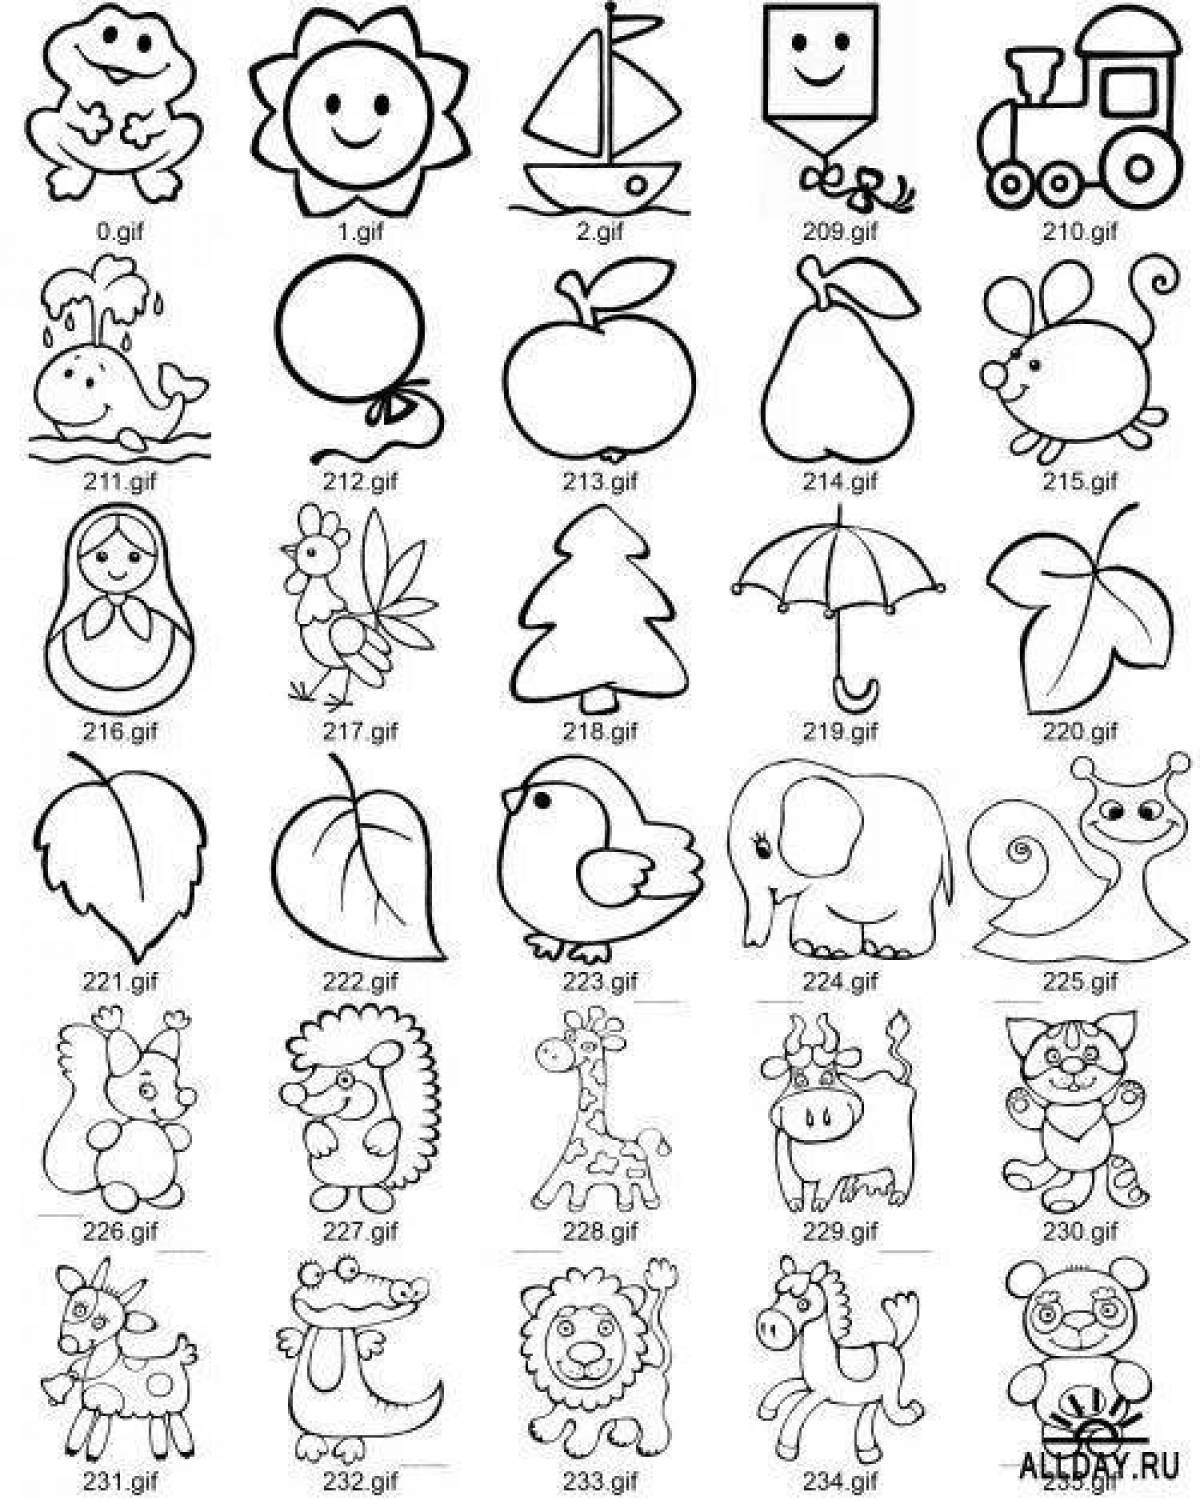 Creative variety of small coloring pages